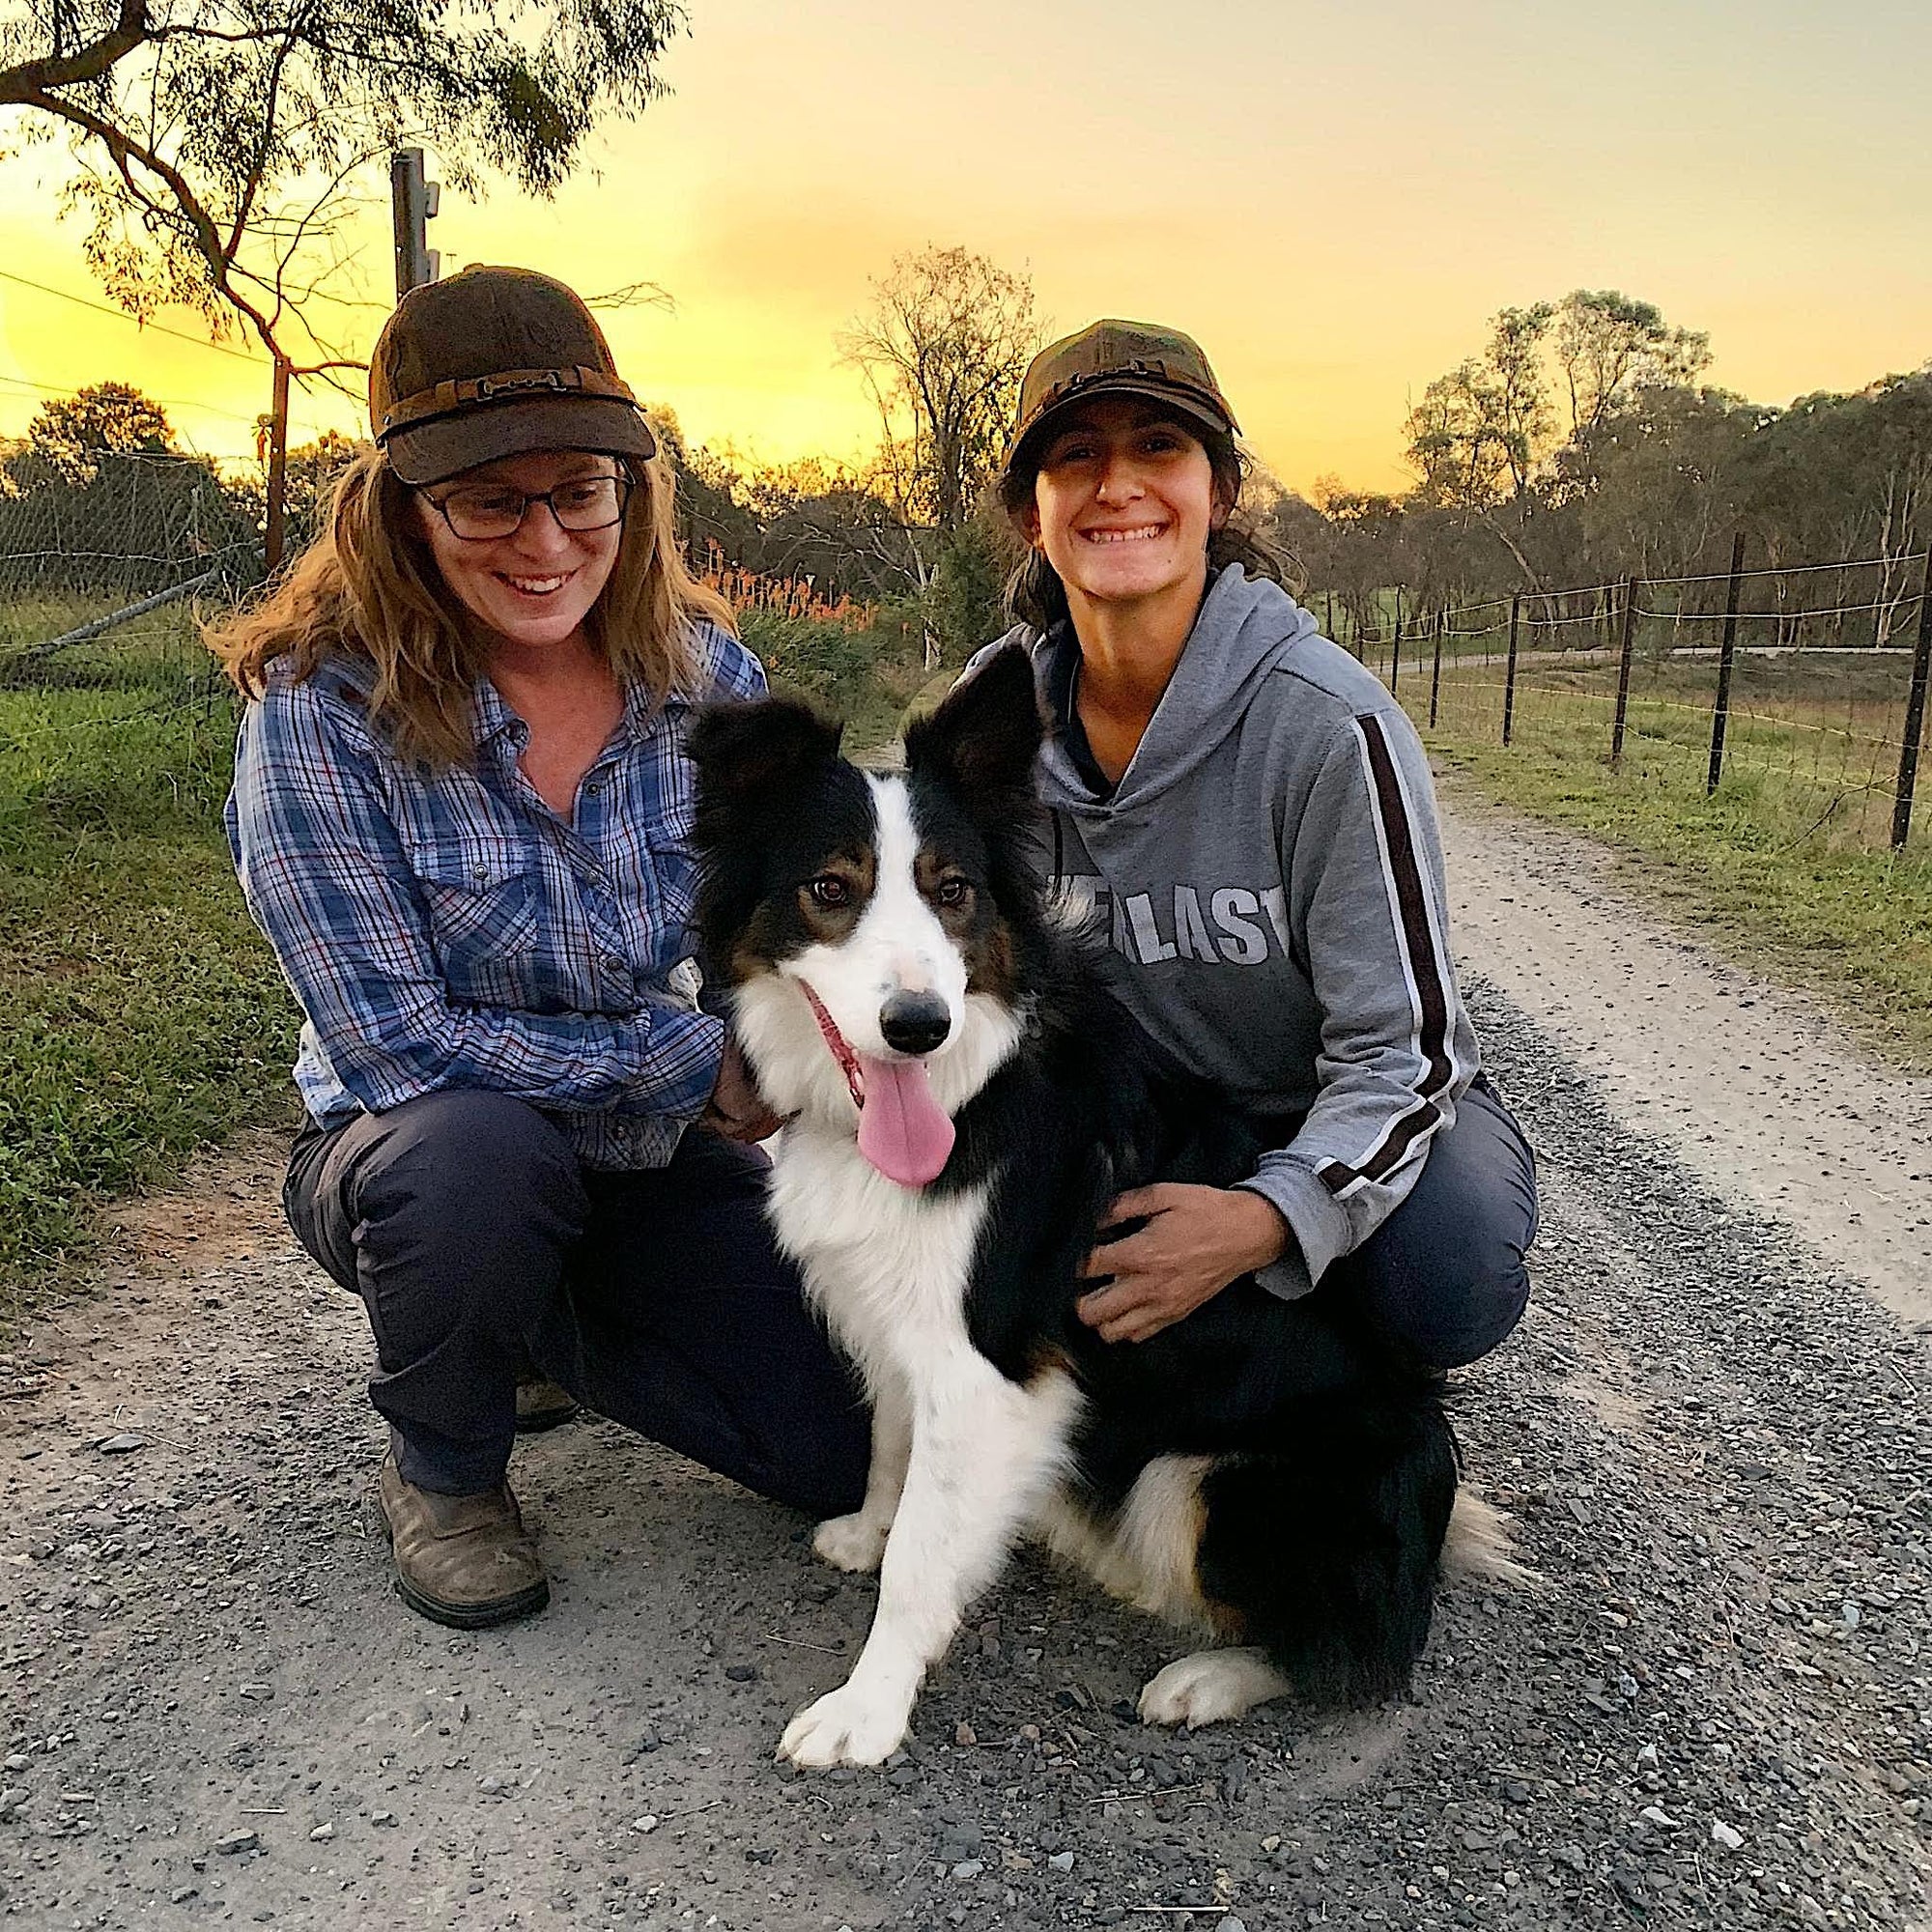 Two women wearing Equestrian cap, smiling while patting a dog.